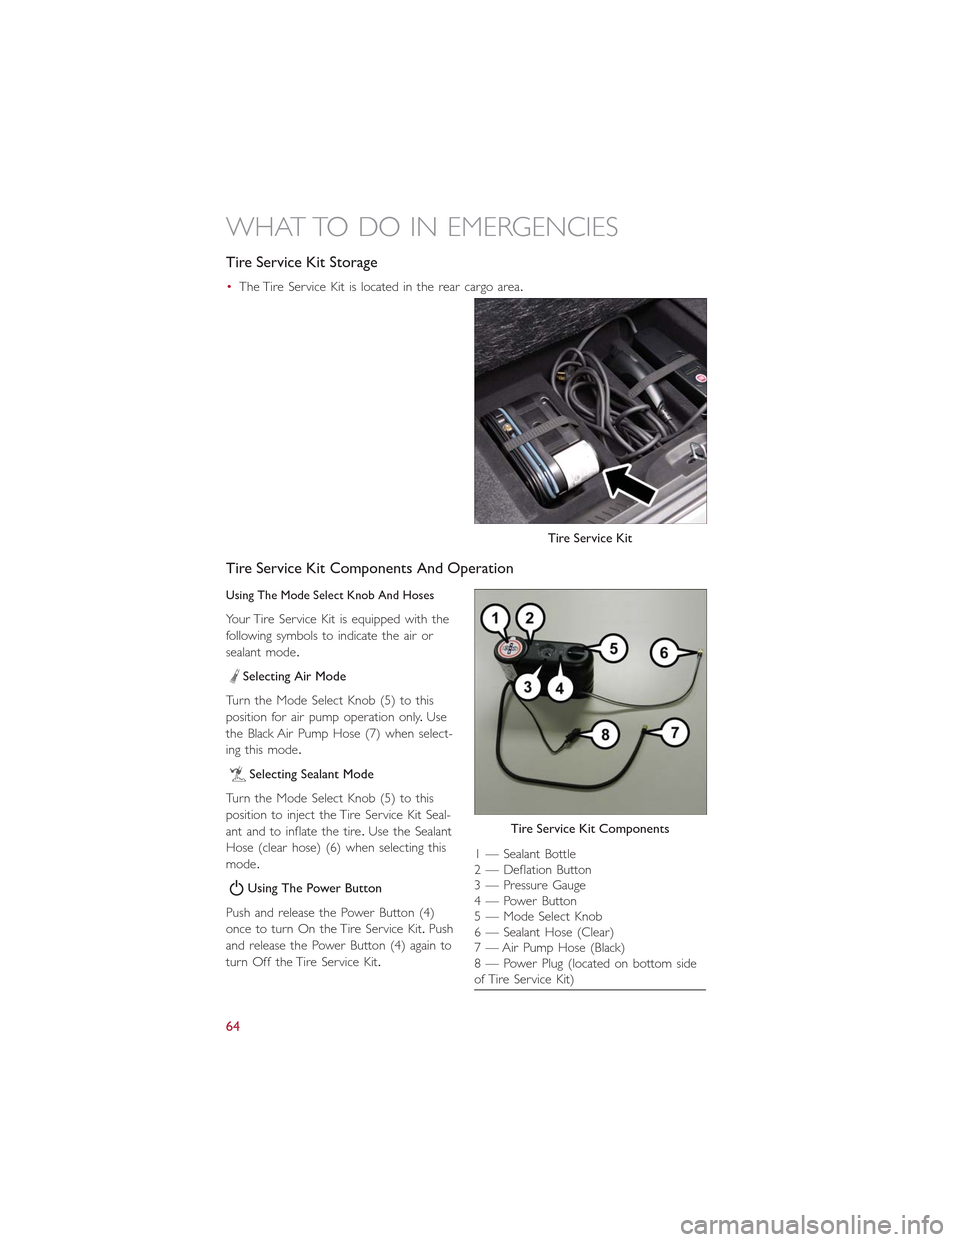 FIAT 500E 2015 2.G User Guide Tire Service Kit Storage
•The Tire Service Kit is located in the rear cargo area.
Tire Service Kit Components And Operation
Using The Mode Select Knob And Hoses
Your Tire Service Kit is equipped wit